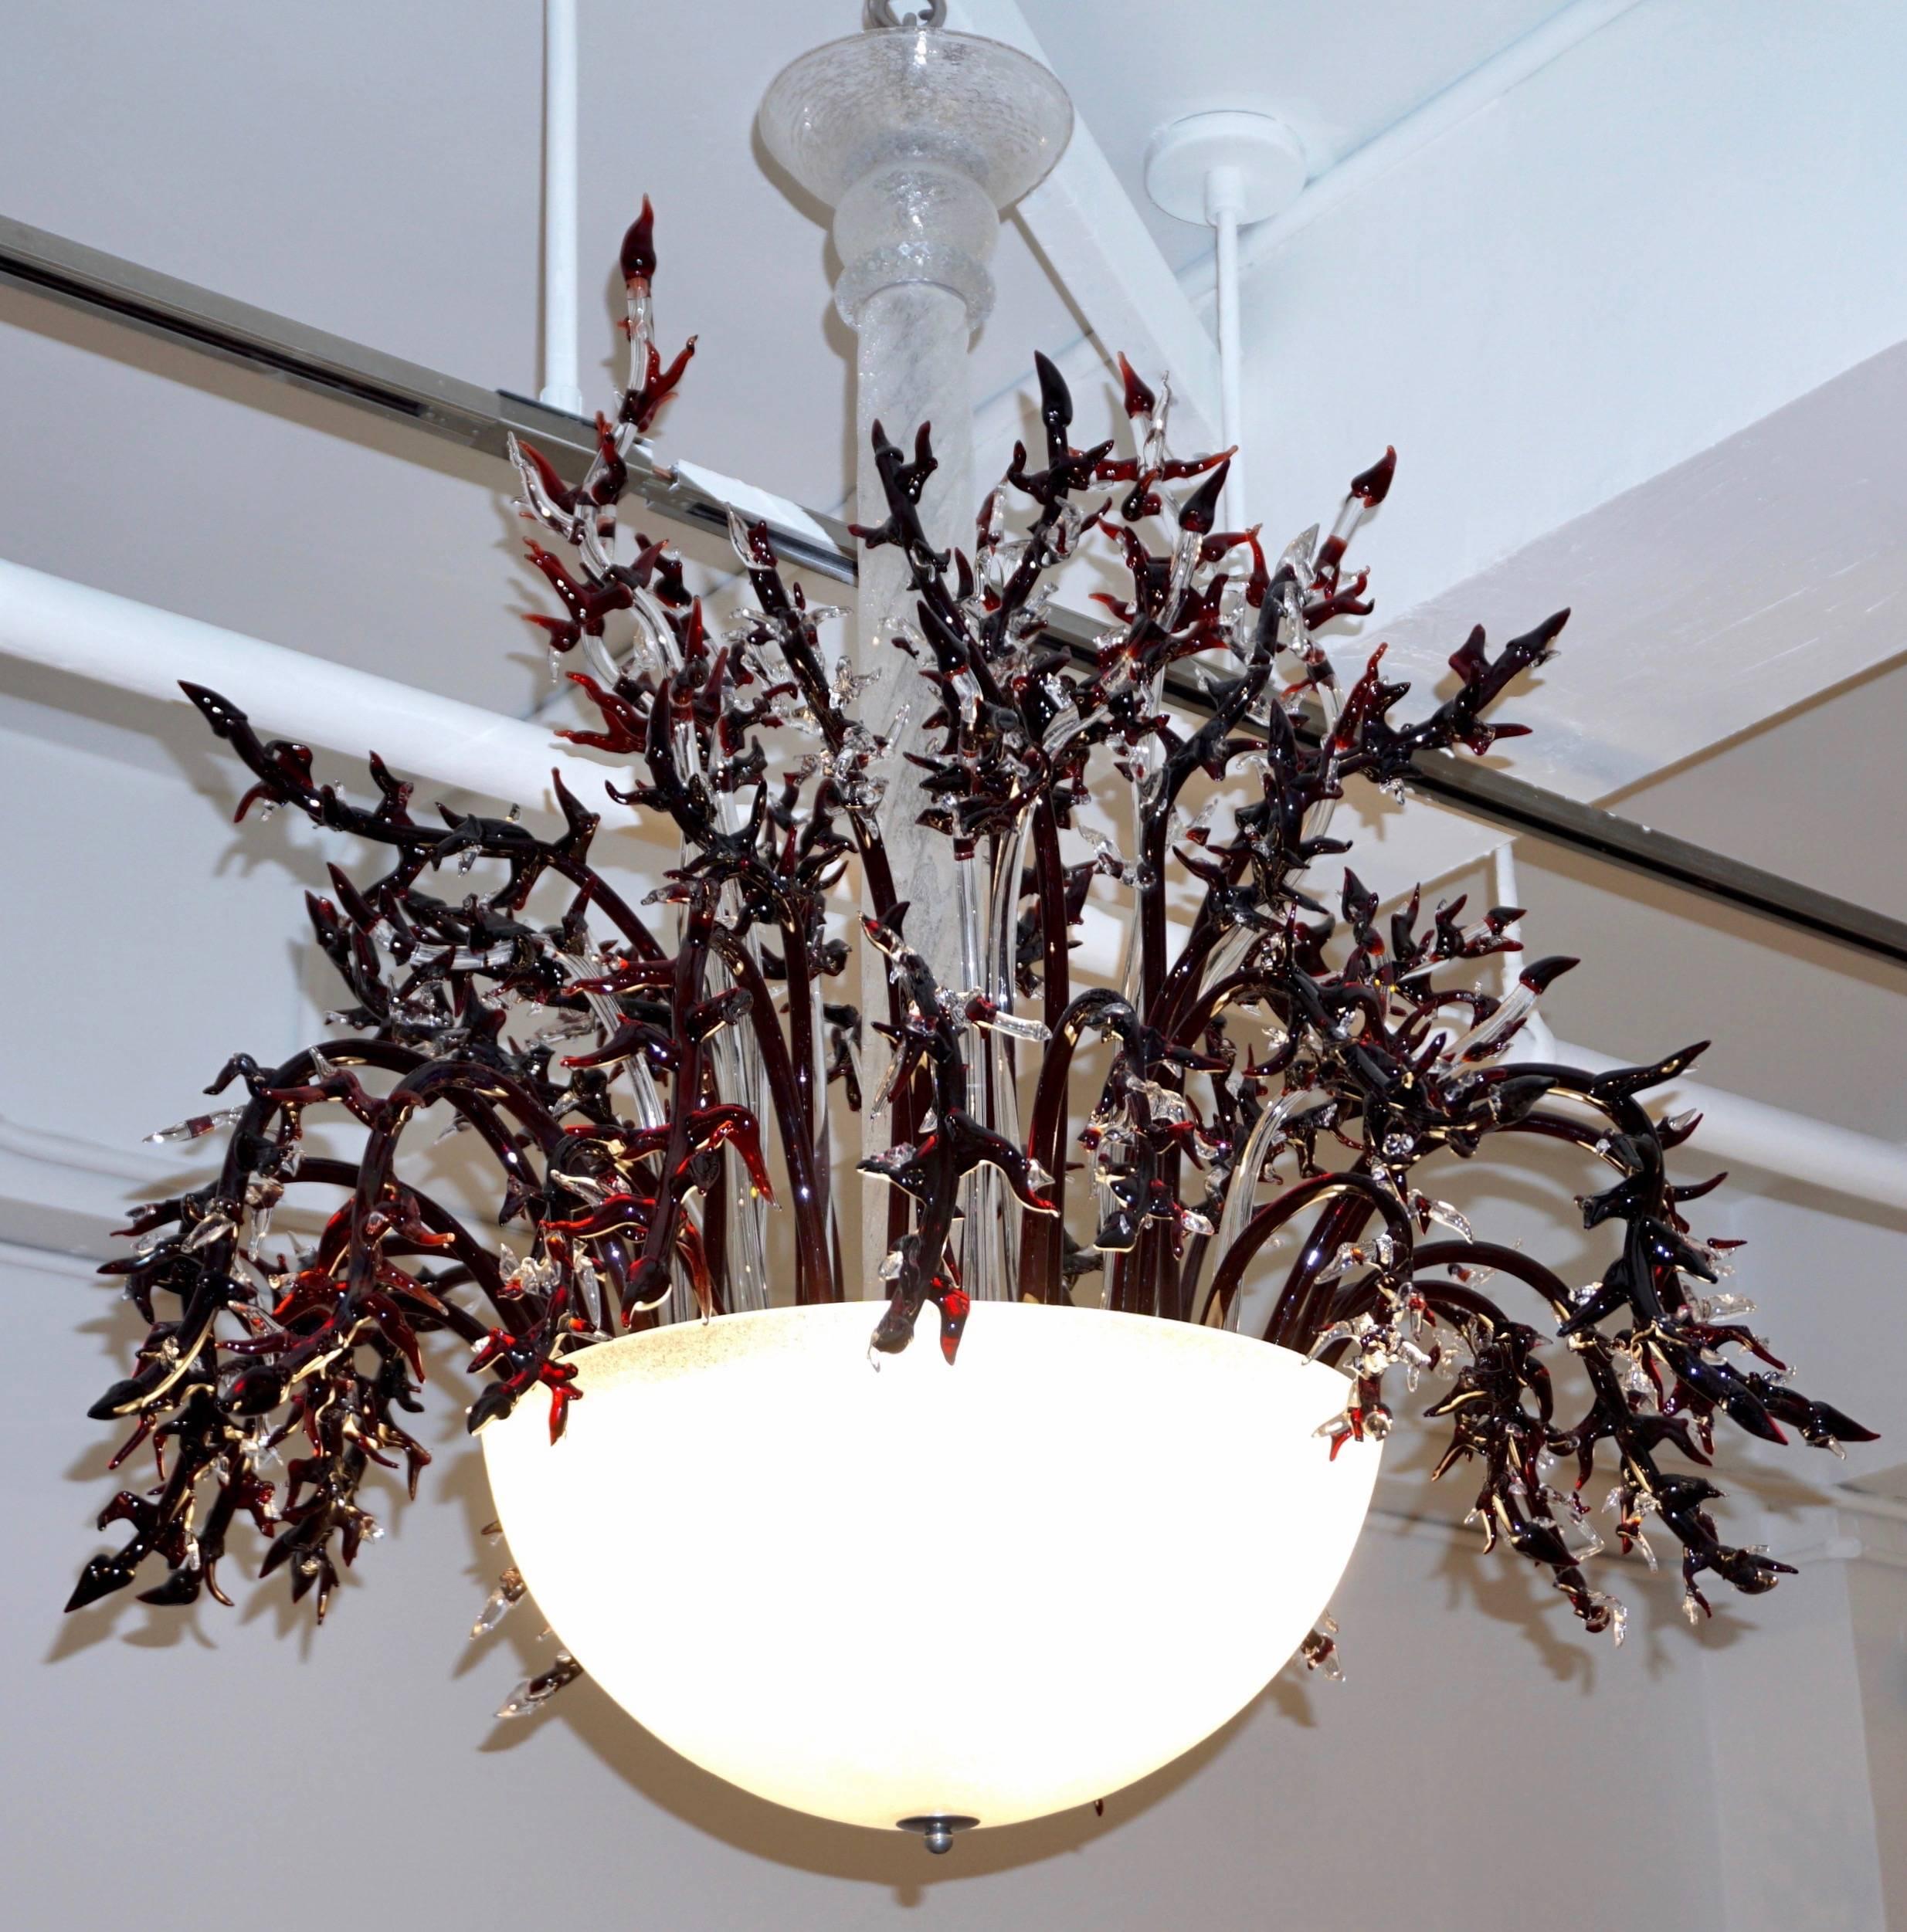 One-of-a-kind vintage Italian Murano glass chandelier of lush design, the frosted white blown Murano glass parts, central pole and half moon bowl are handcrafted with crackled texture giving a precious effect. This is a gem with very rare and